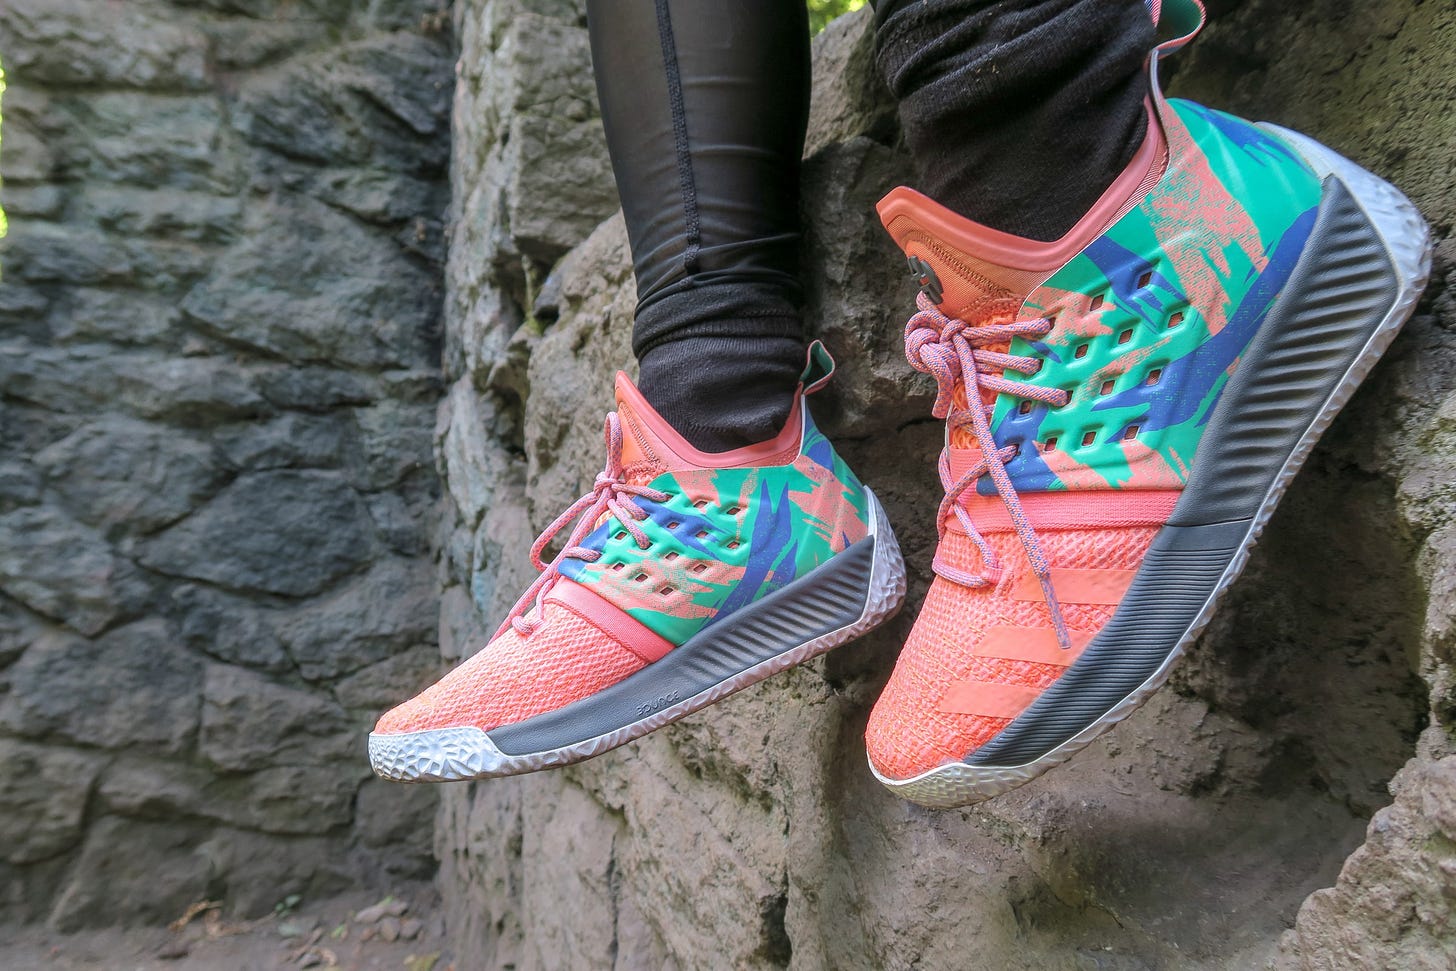 a person sitting on a rock outcrop, wearing bright colored sneakers